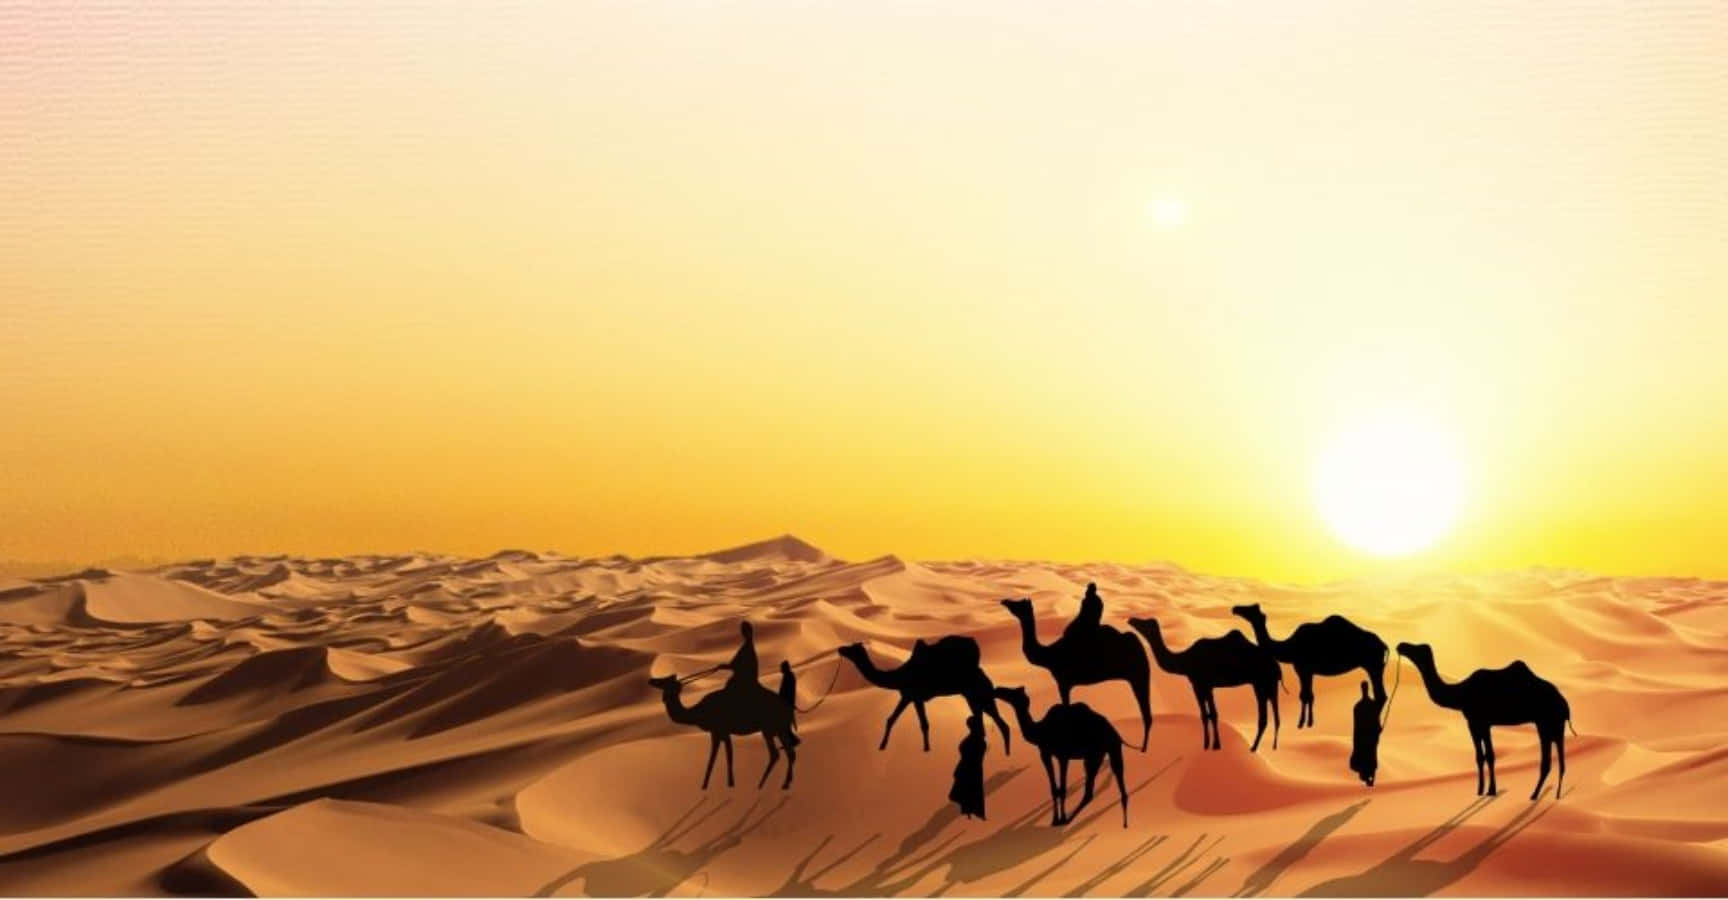 a group of camels walking in the desert at sunset